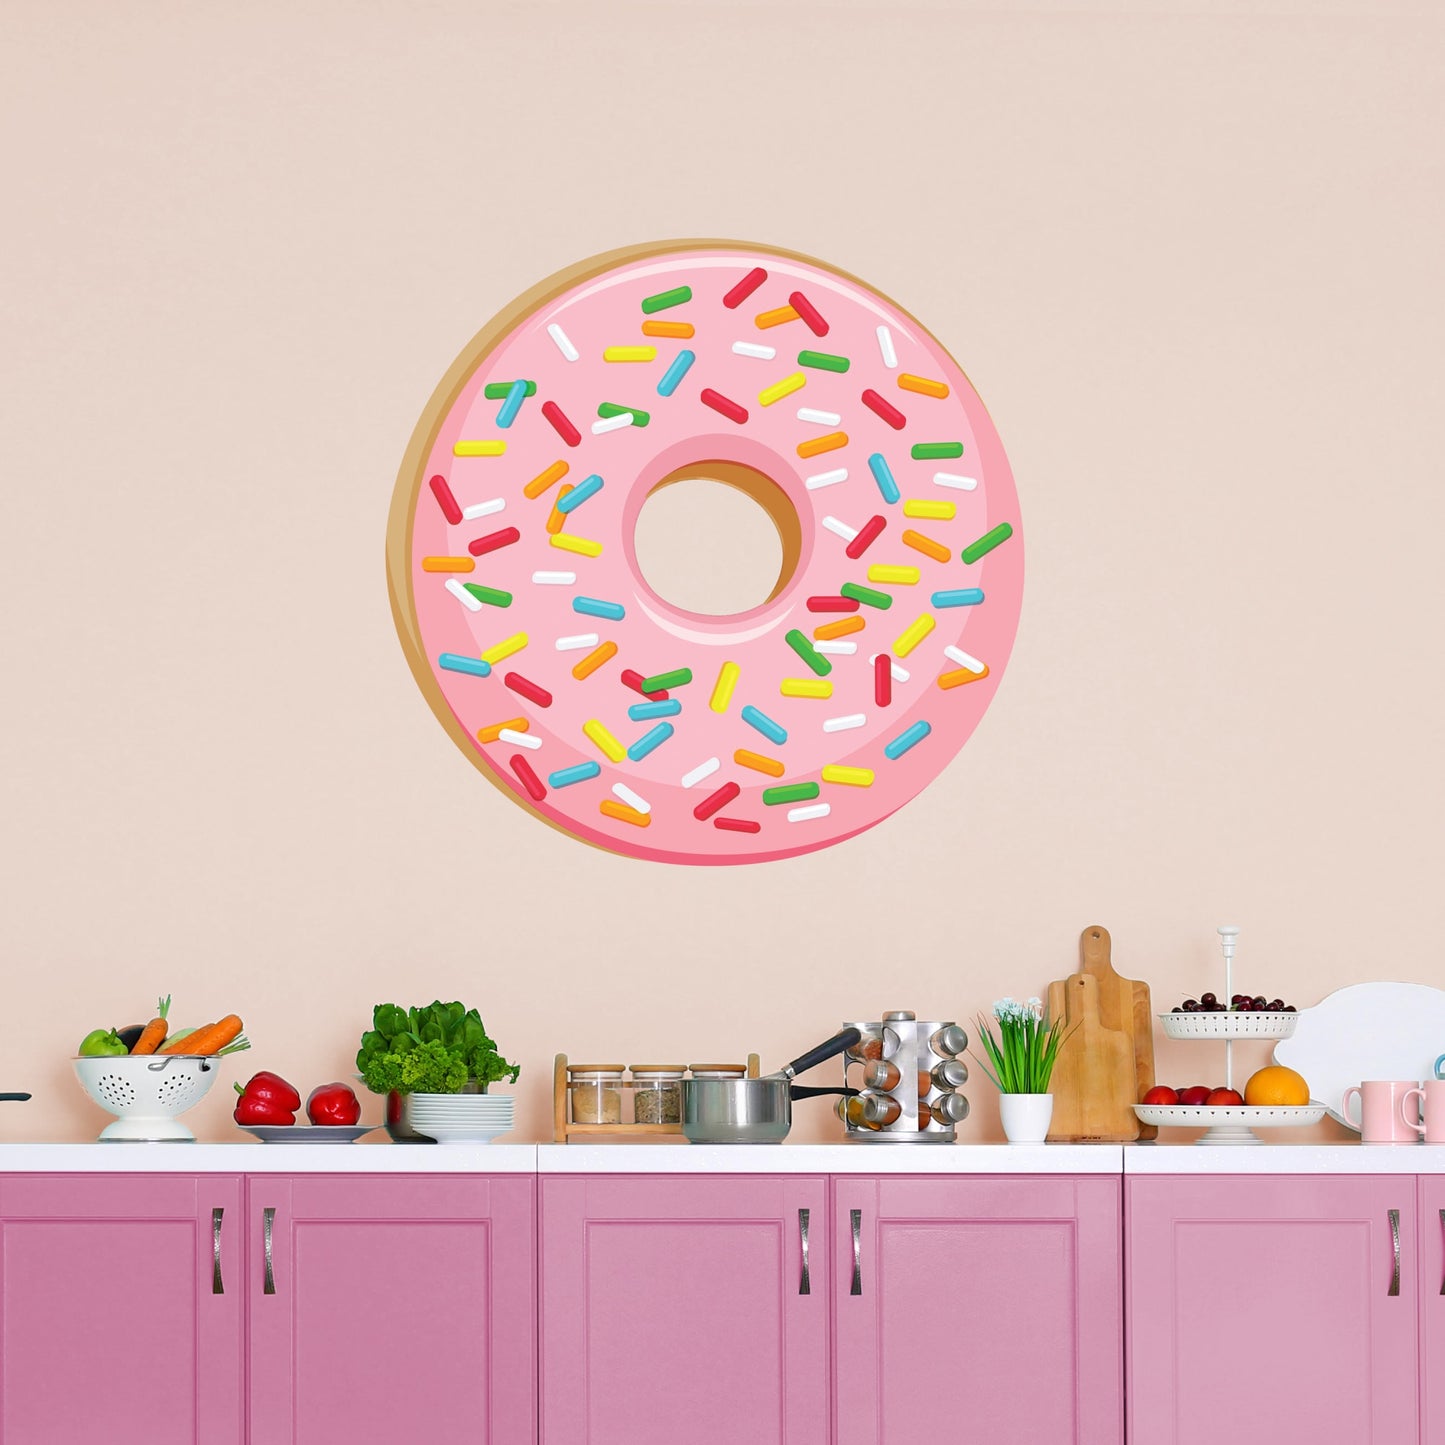 X-Large Donut + 2 Decals (23"W x 23"H)